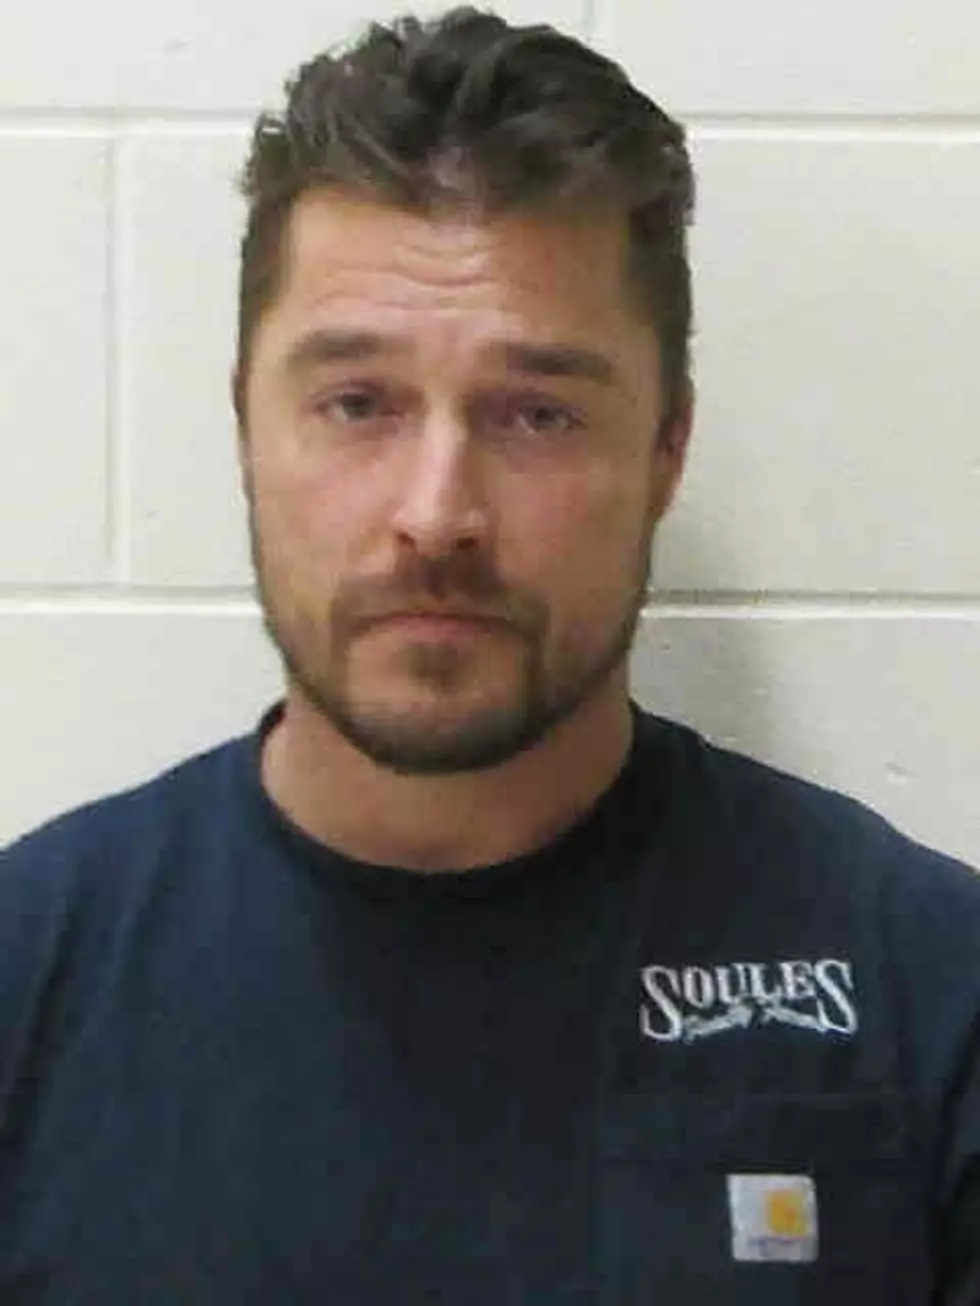 Iowa Bachelor Chris Soules Pleads Guilty to Lesser Charge Involving Fatal Crash